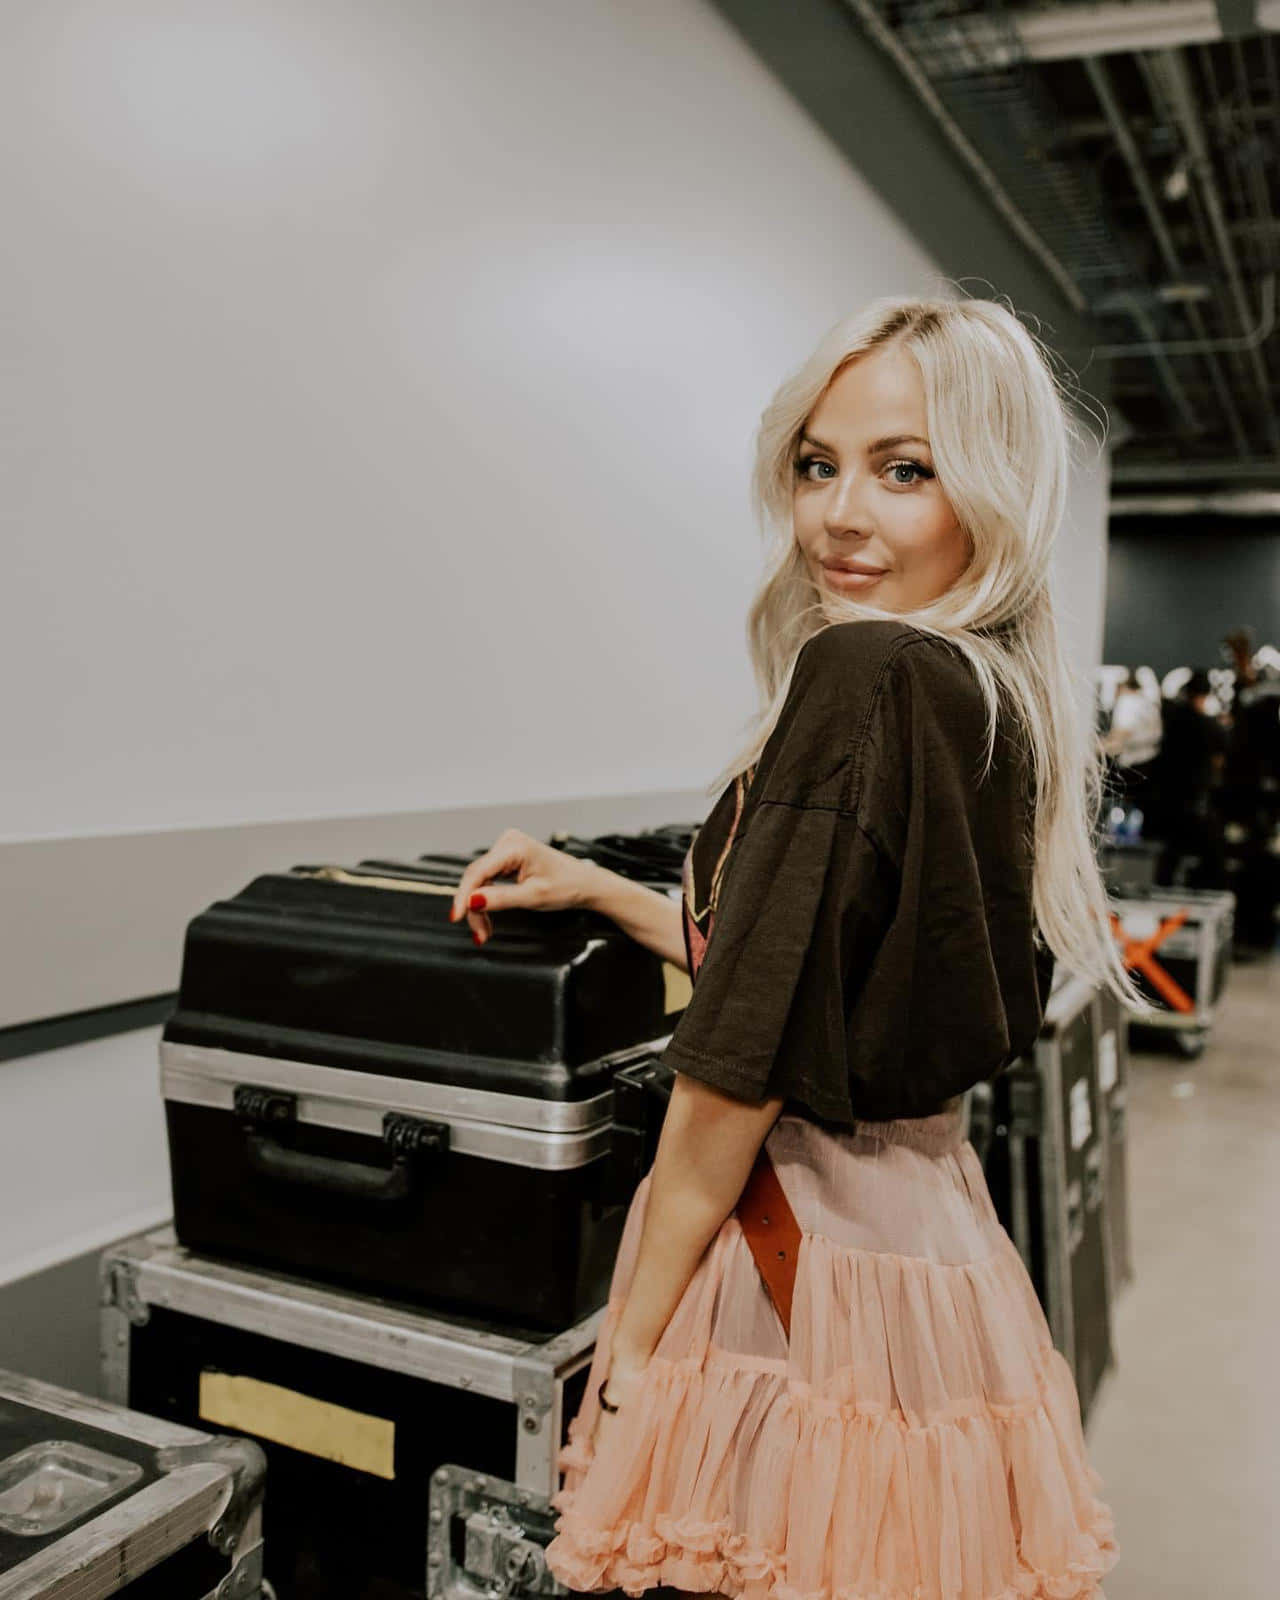 Blonde Woman Backstage With Equipment Wallpaper